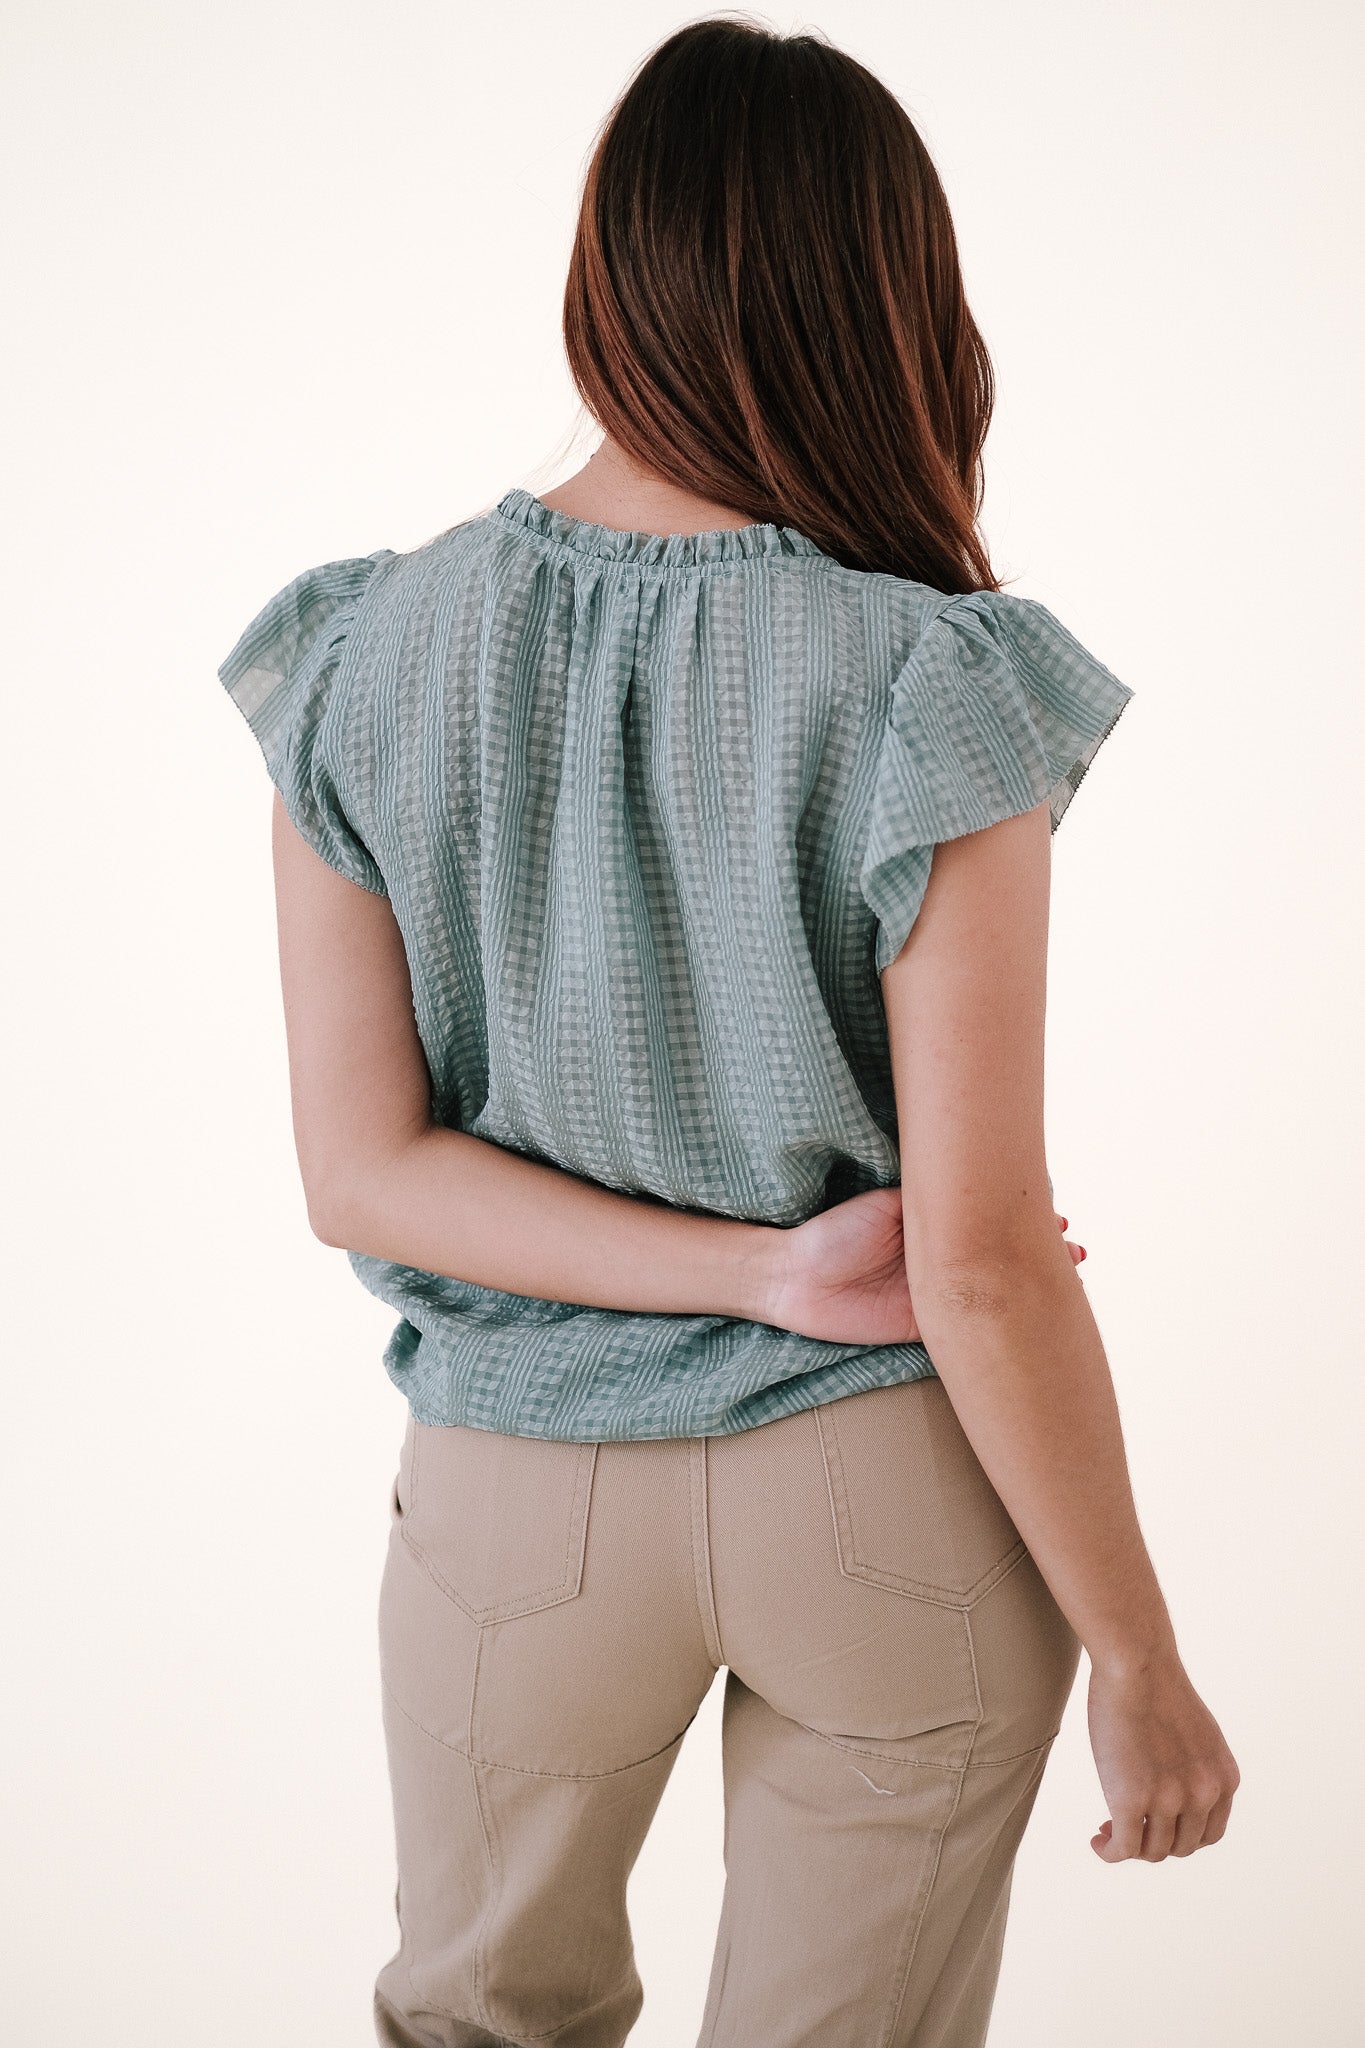 Current Air Cora Picot Flutter Sleeve Blouse (Sage)